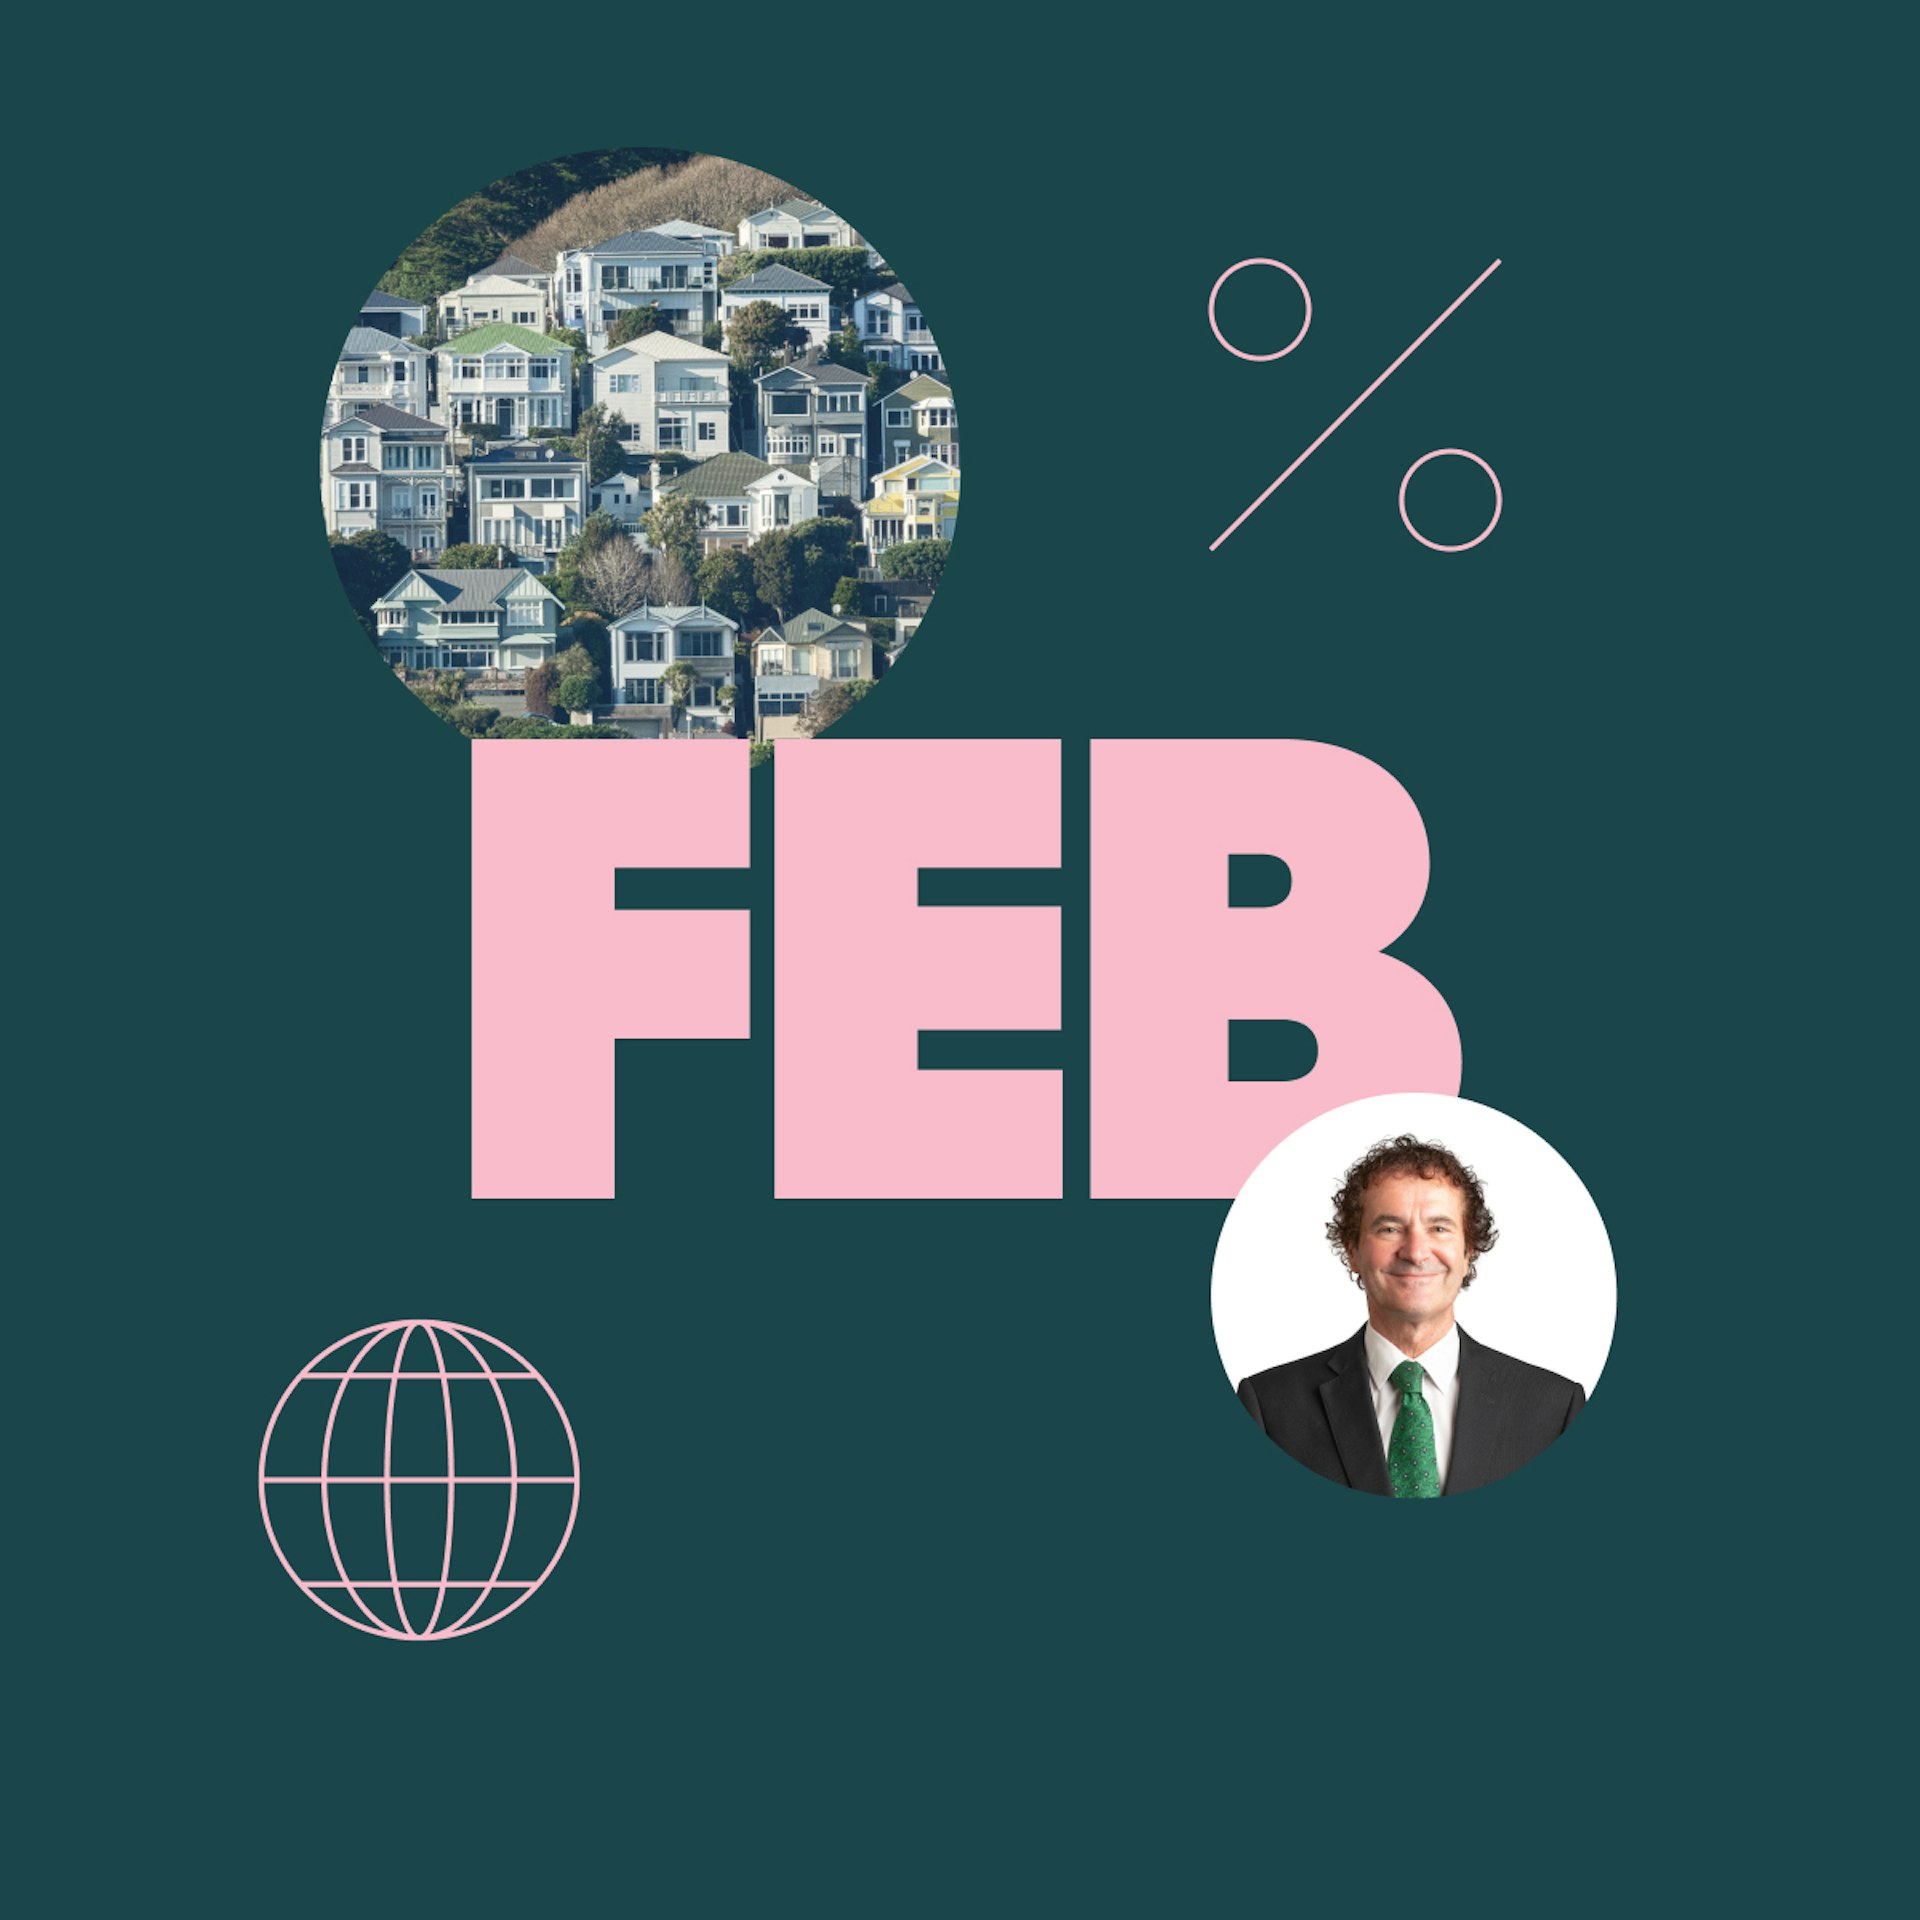 The investing insights cover for February, showing Tony's face, housing, a percentage sign, and a wireframe globe.